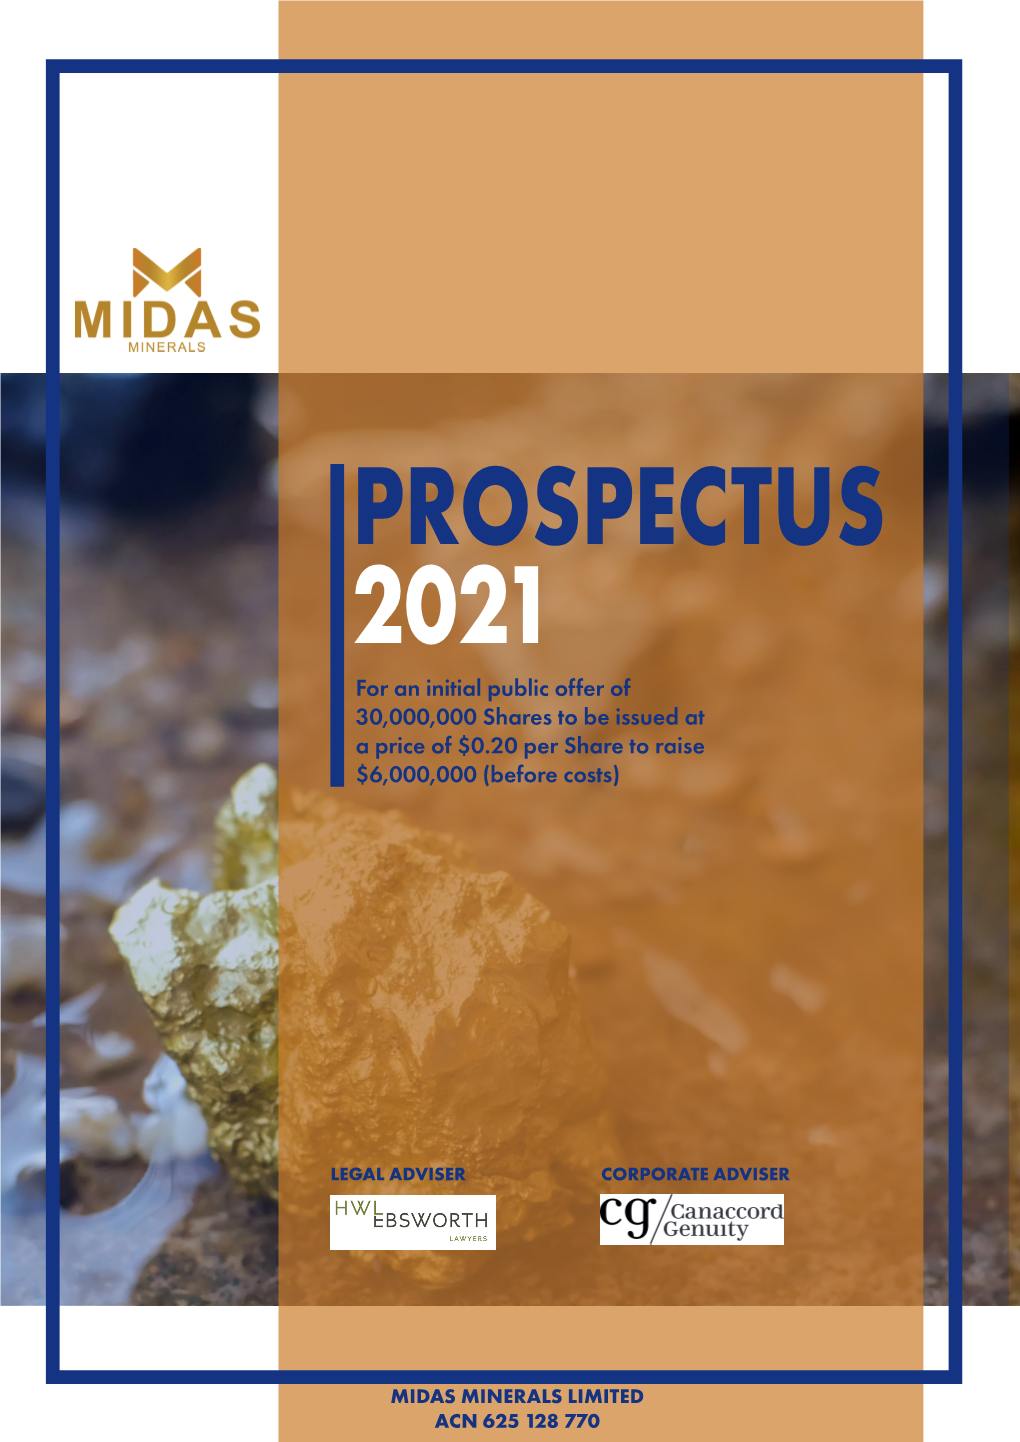 PROSPECTUS 2021 for an Initial Public Offer of 30,000,000 Shares to Be Issued at a Price of $0.20 Per Share to Raise $6,000,000 (Before Costs)